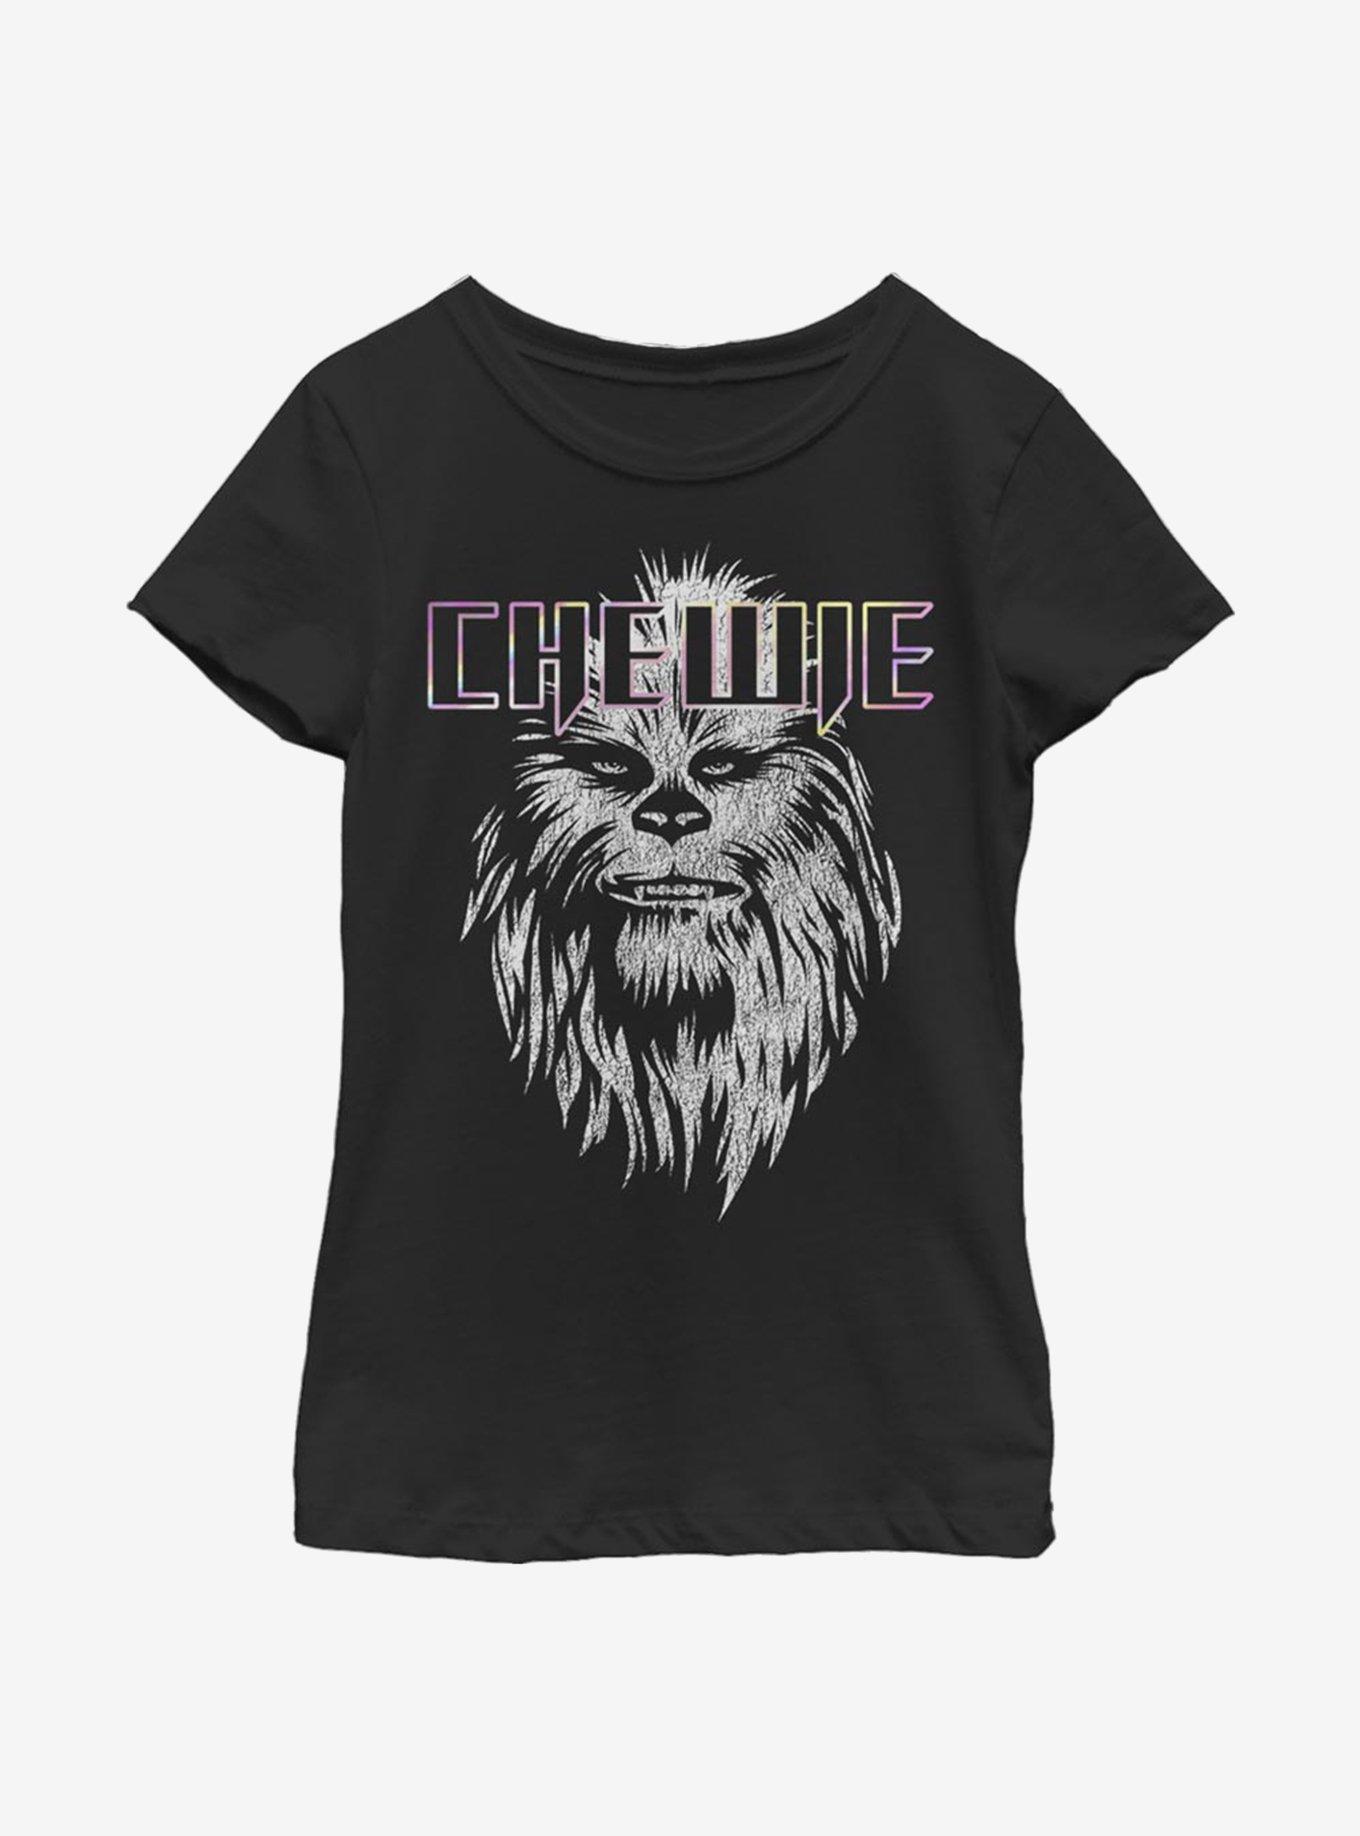 Star Wars Chewie Face Youth Girls T-Shirt, BLACK, hi-res